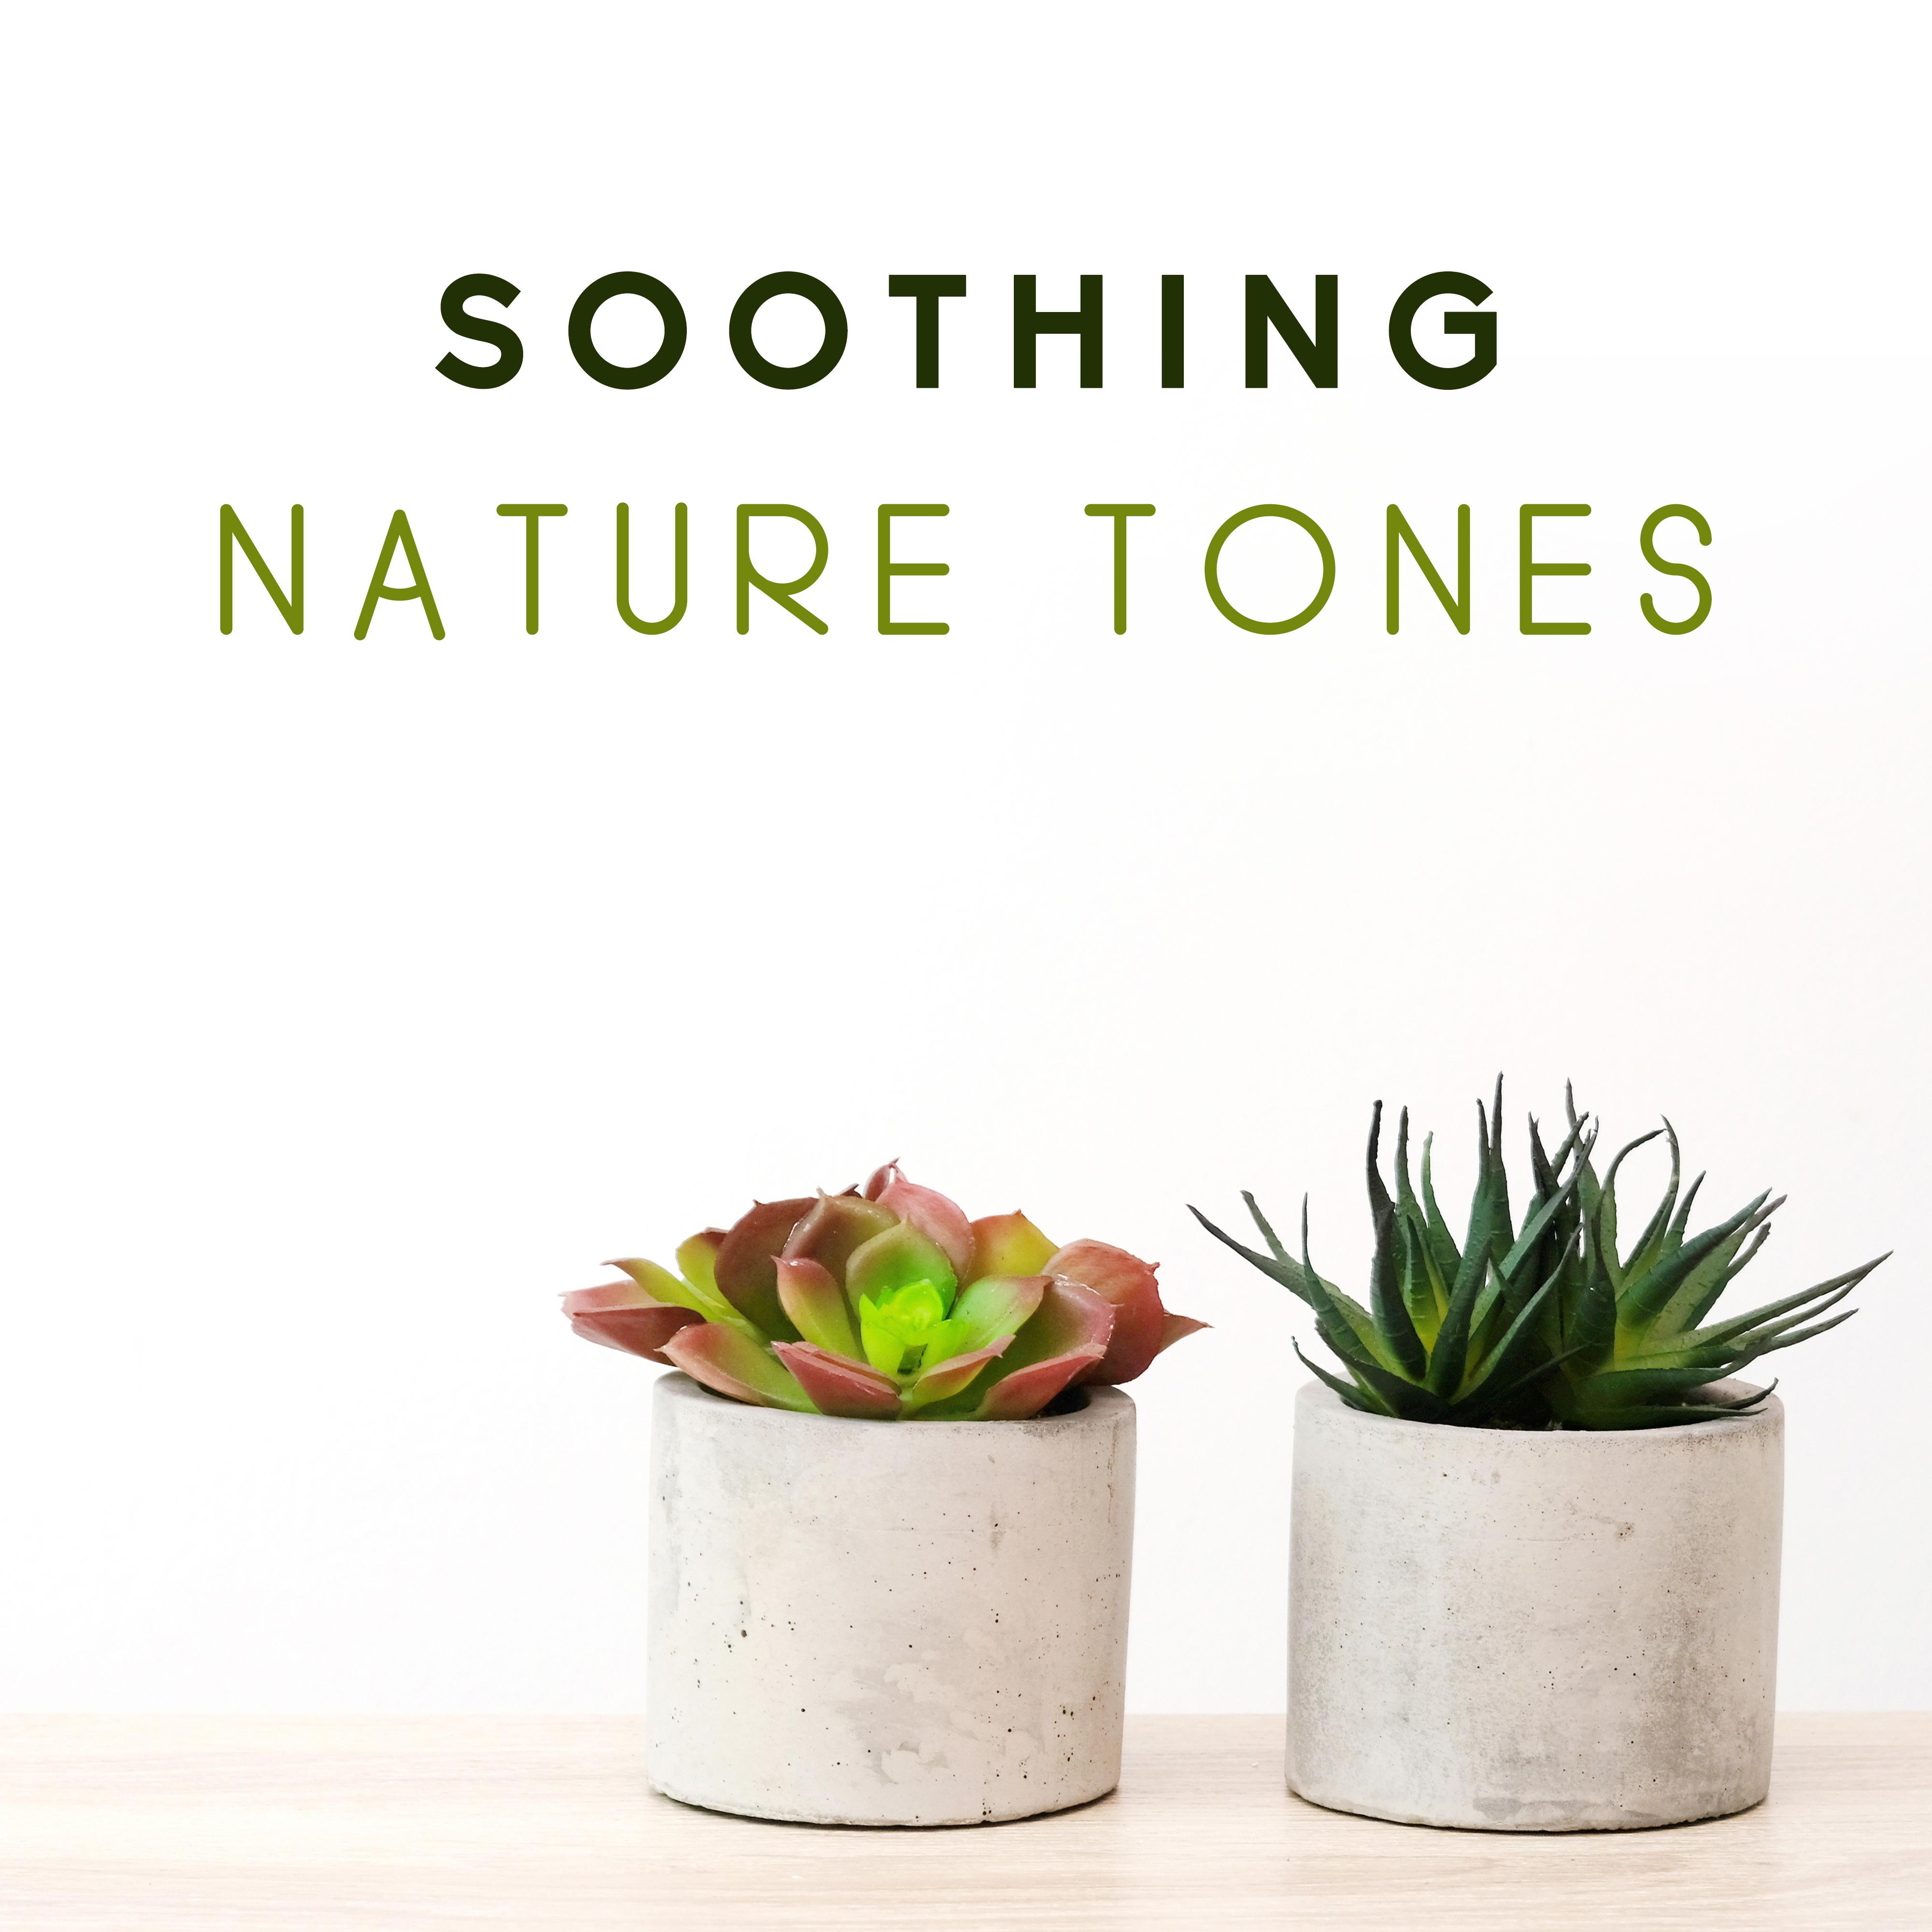 Soothing Nature Tones